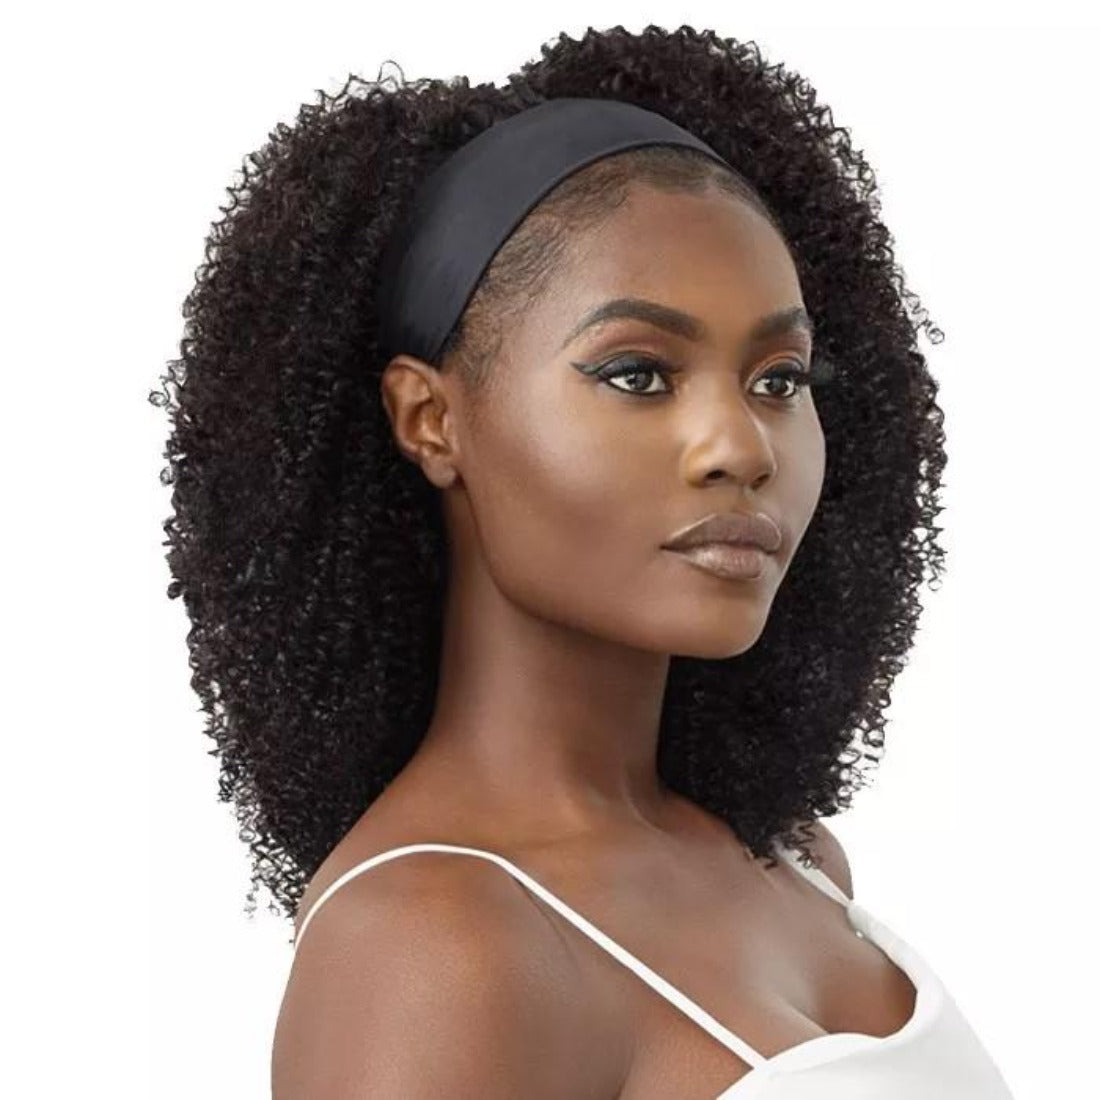 Outre 100% Unprocessed Human Hair Headband Wig KINKY COILY 14